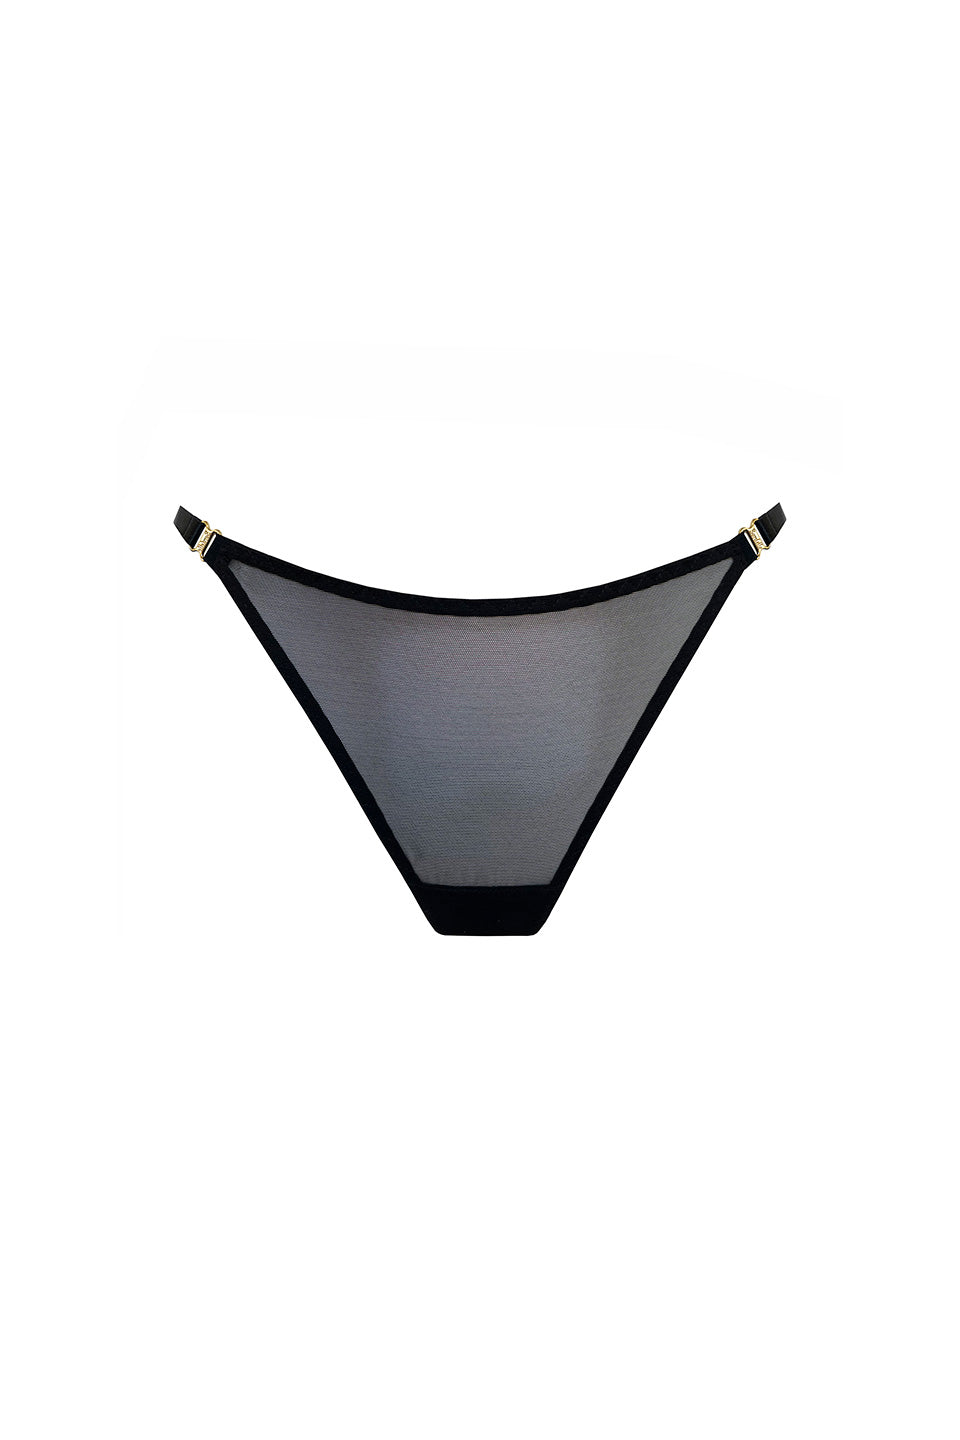 Thumbnail for Product gallery 1, Vero Thong Black